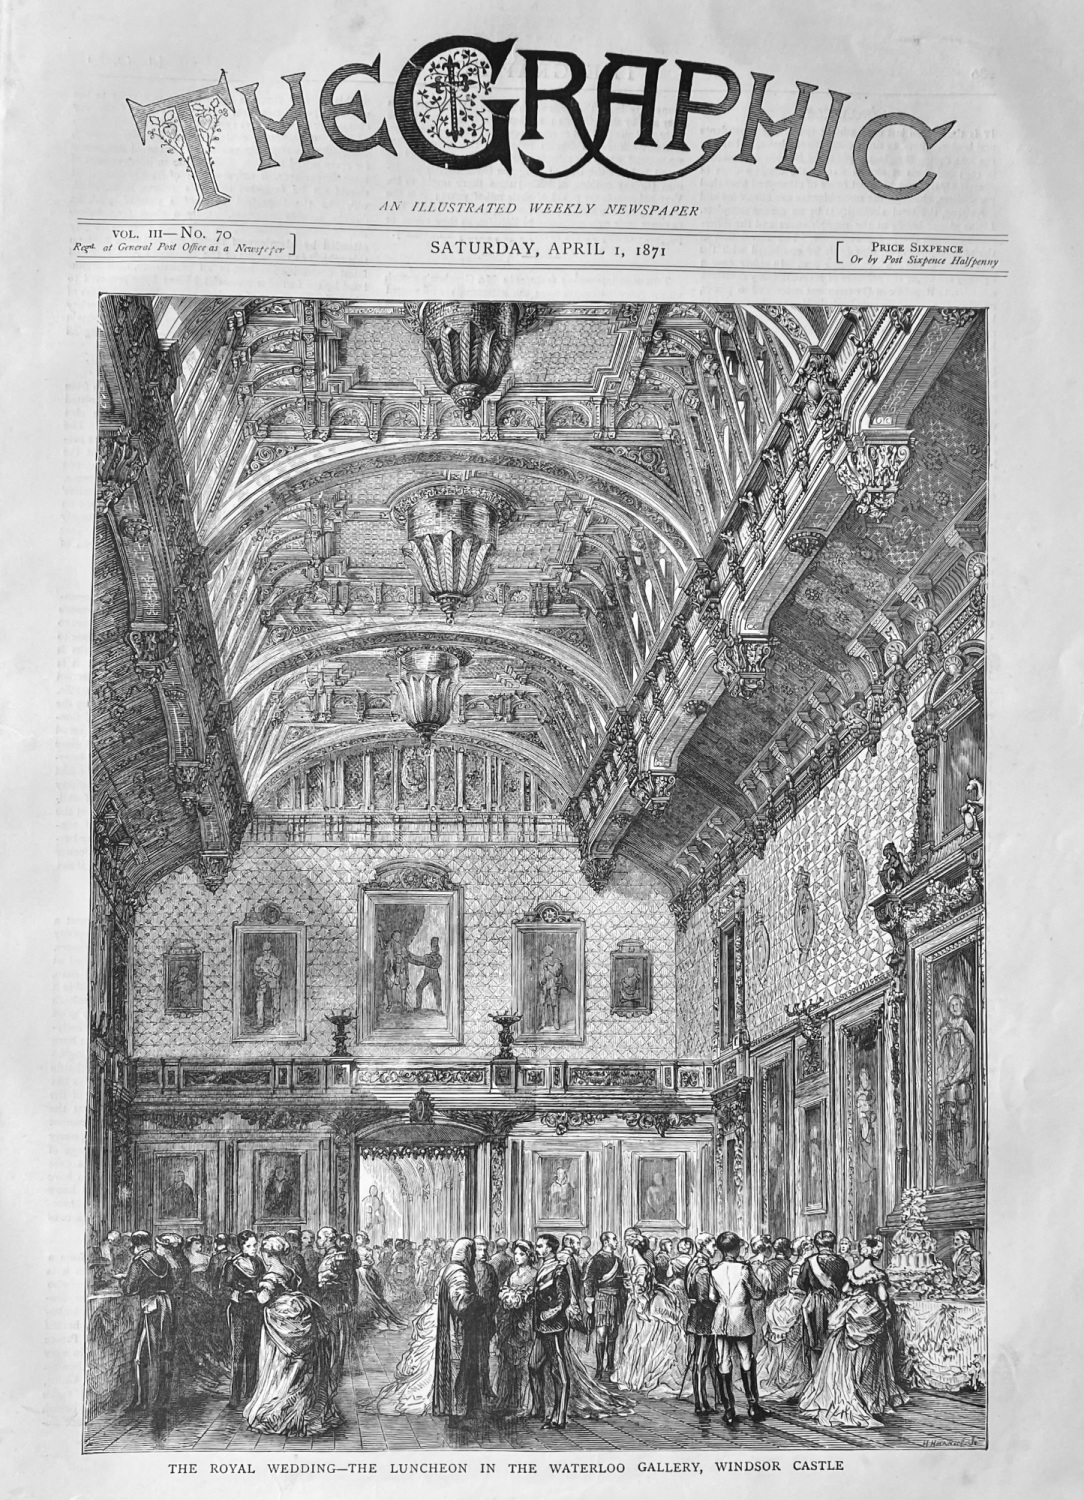 The Royal Wedding- The Luncheon in the Waterloo Gallery, Windsor Castle.  1